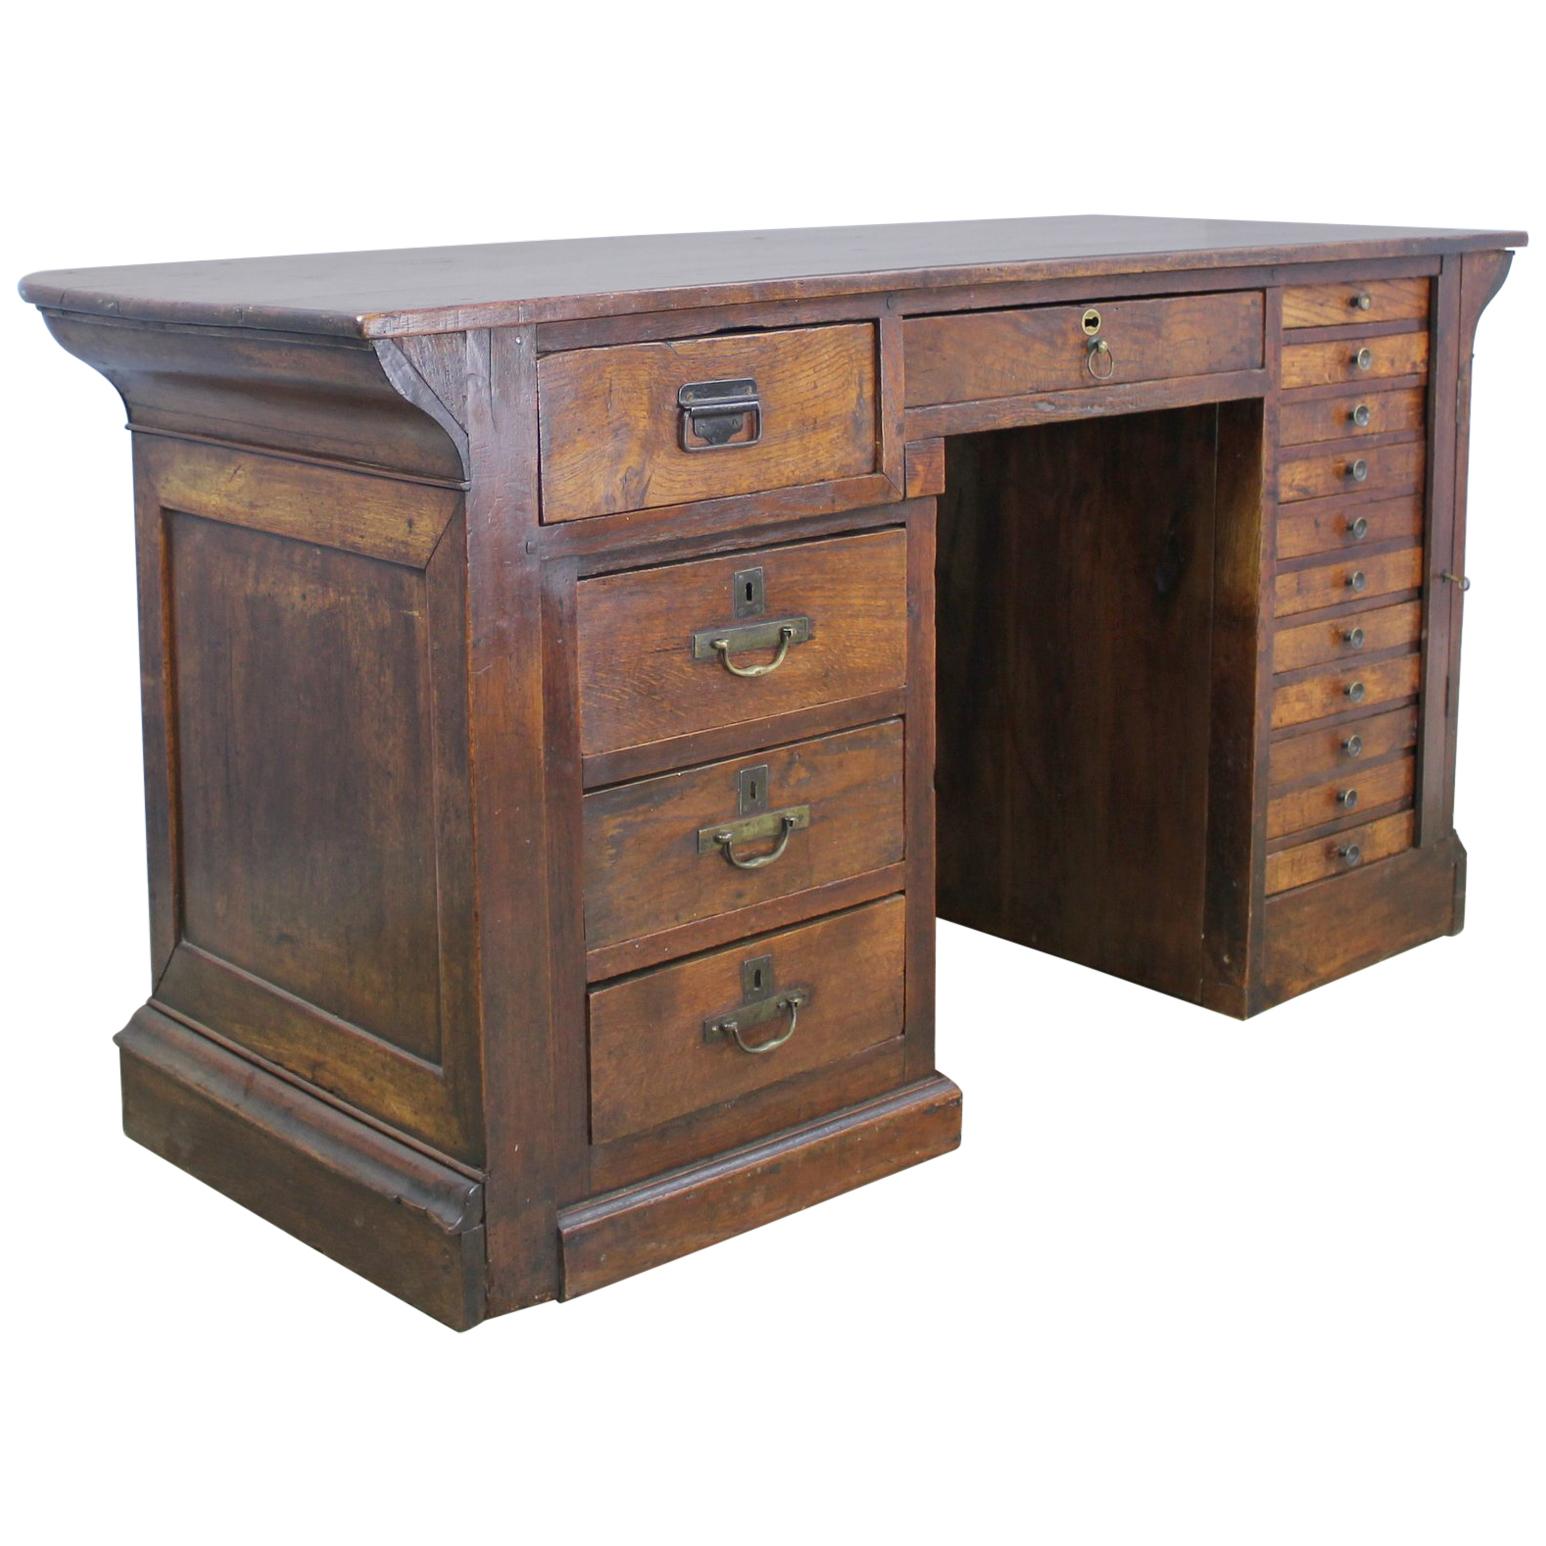 Antique French Counter Desk with Wellington-Style Cabinet